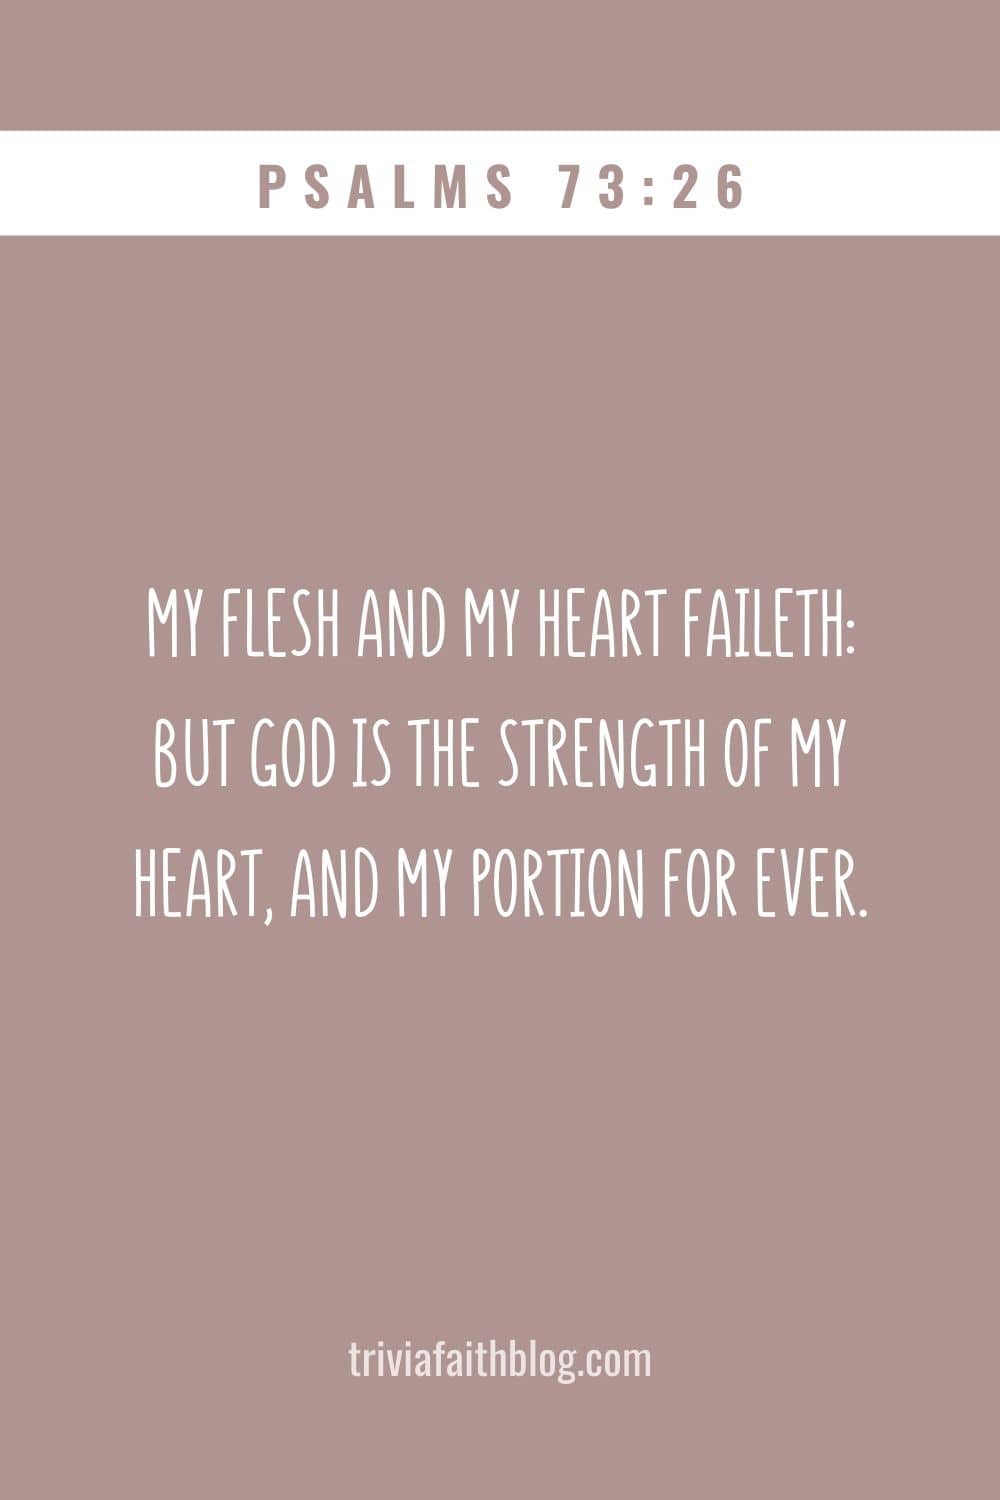 My flesh and my heart faileth but God is the strength of my heart, and my portion for ever